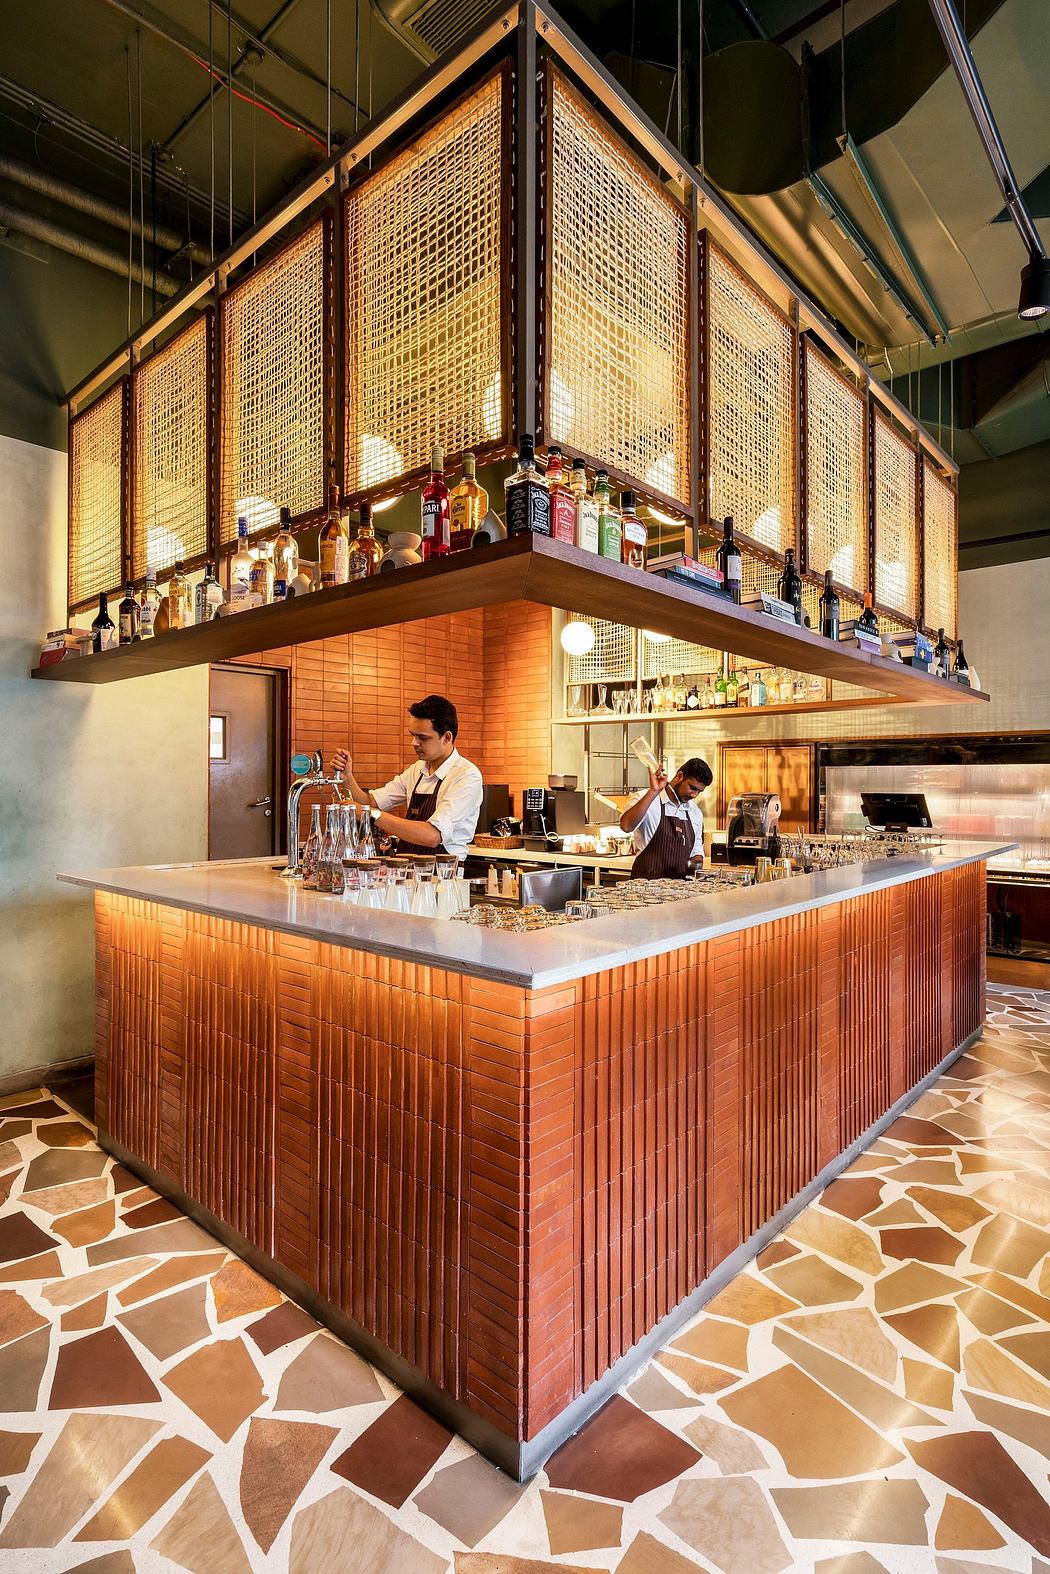 Rustic yet modern bar with wooden screens, sleek counters, and creative tile flooring.